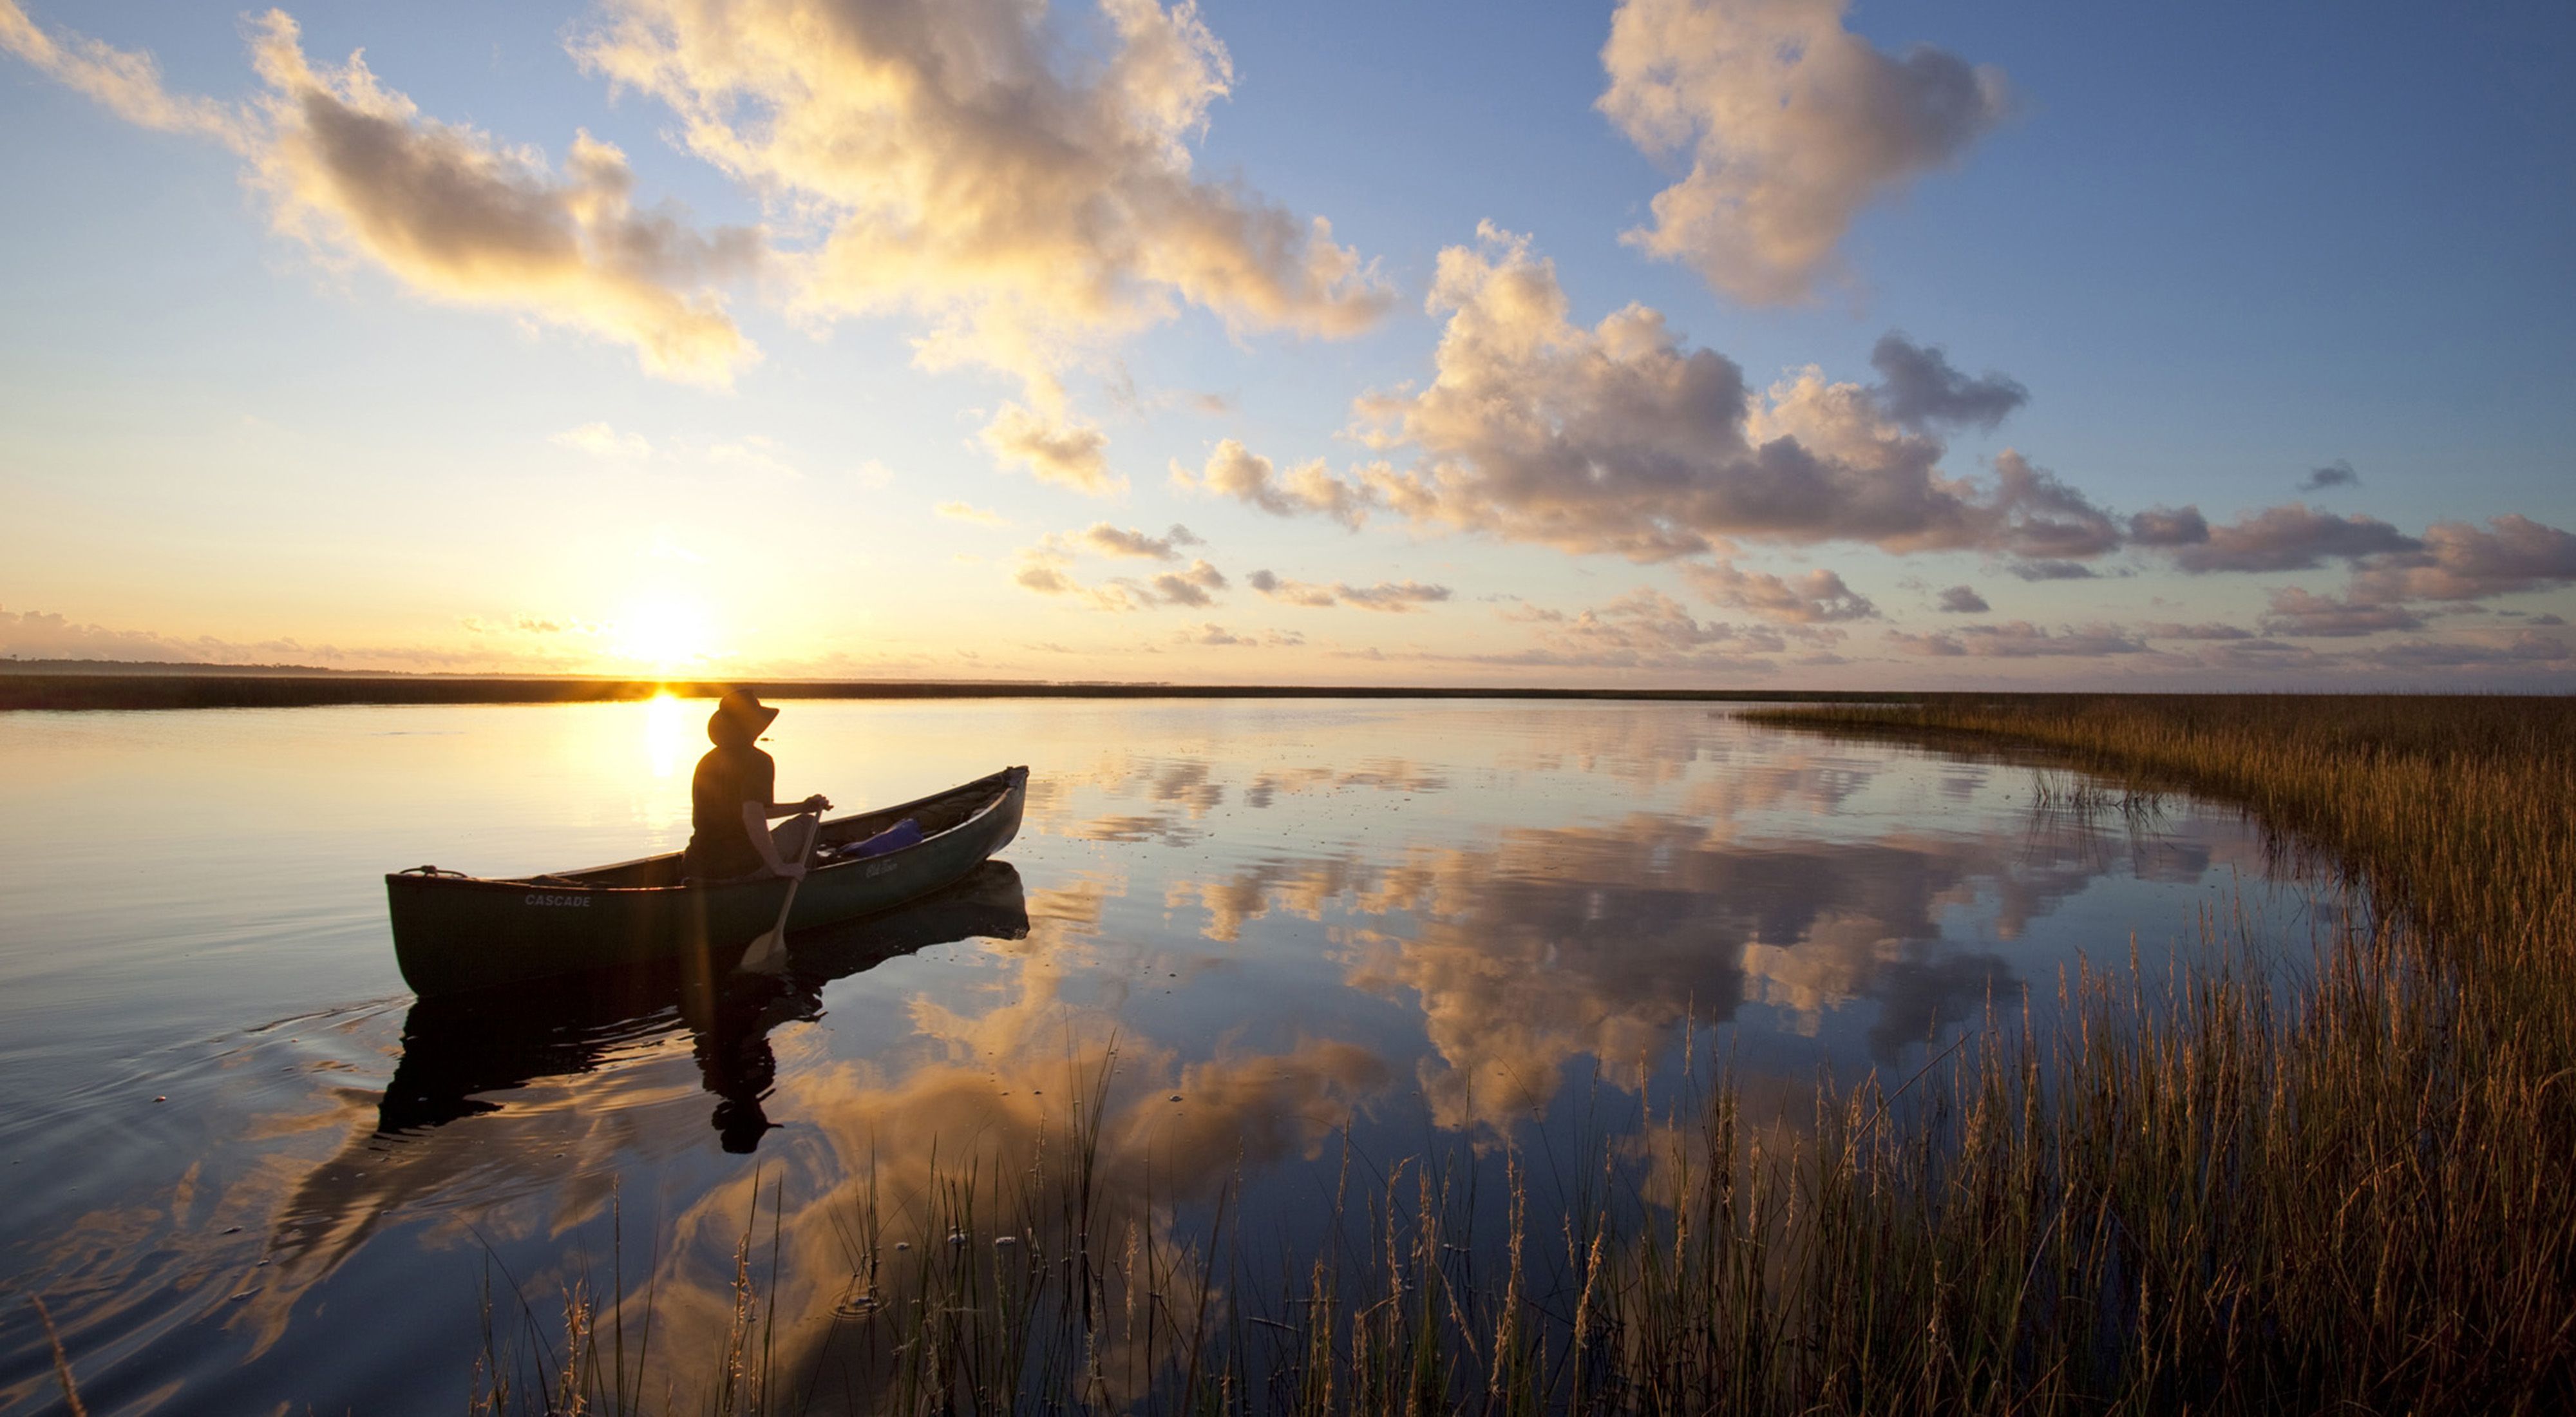 A person paddles a canoe at sunset on a marshy stream with fluffy clouds reflected in the surface of the water.